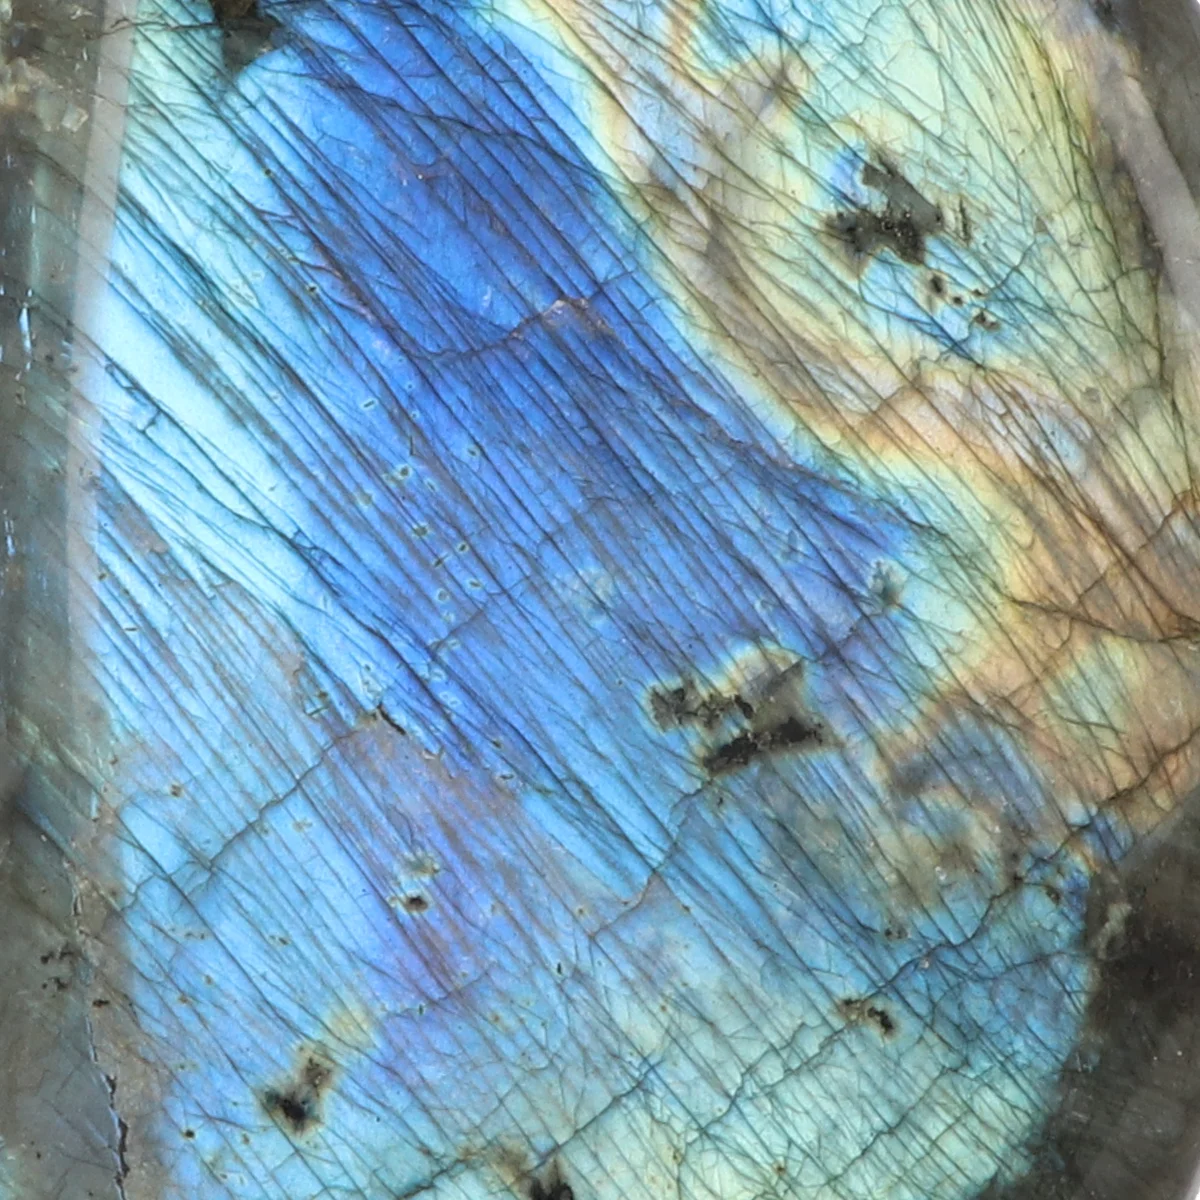 Labradorite Sculpture from Madagascar. with item number 18112